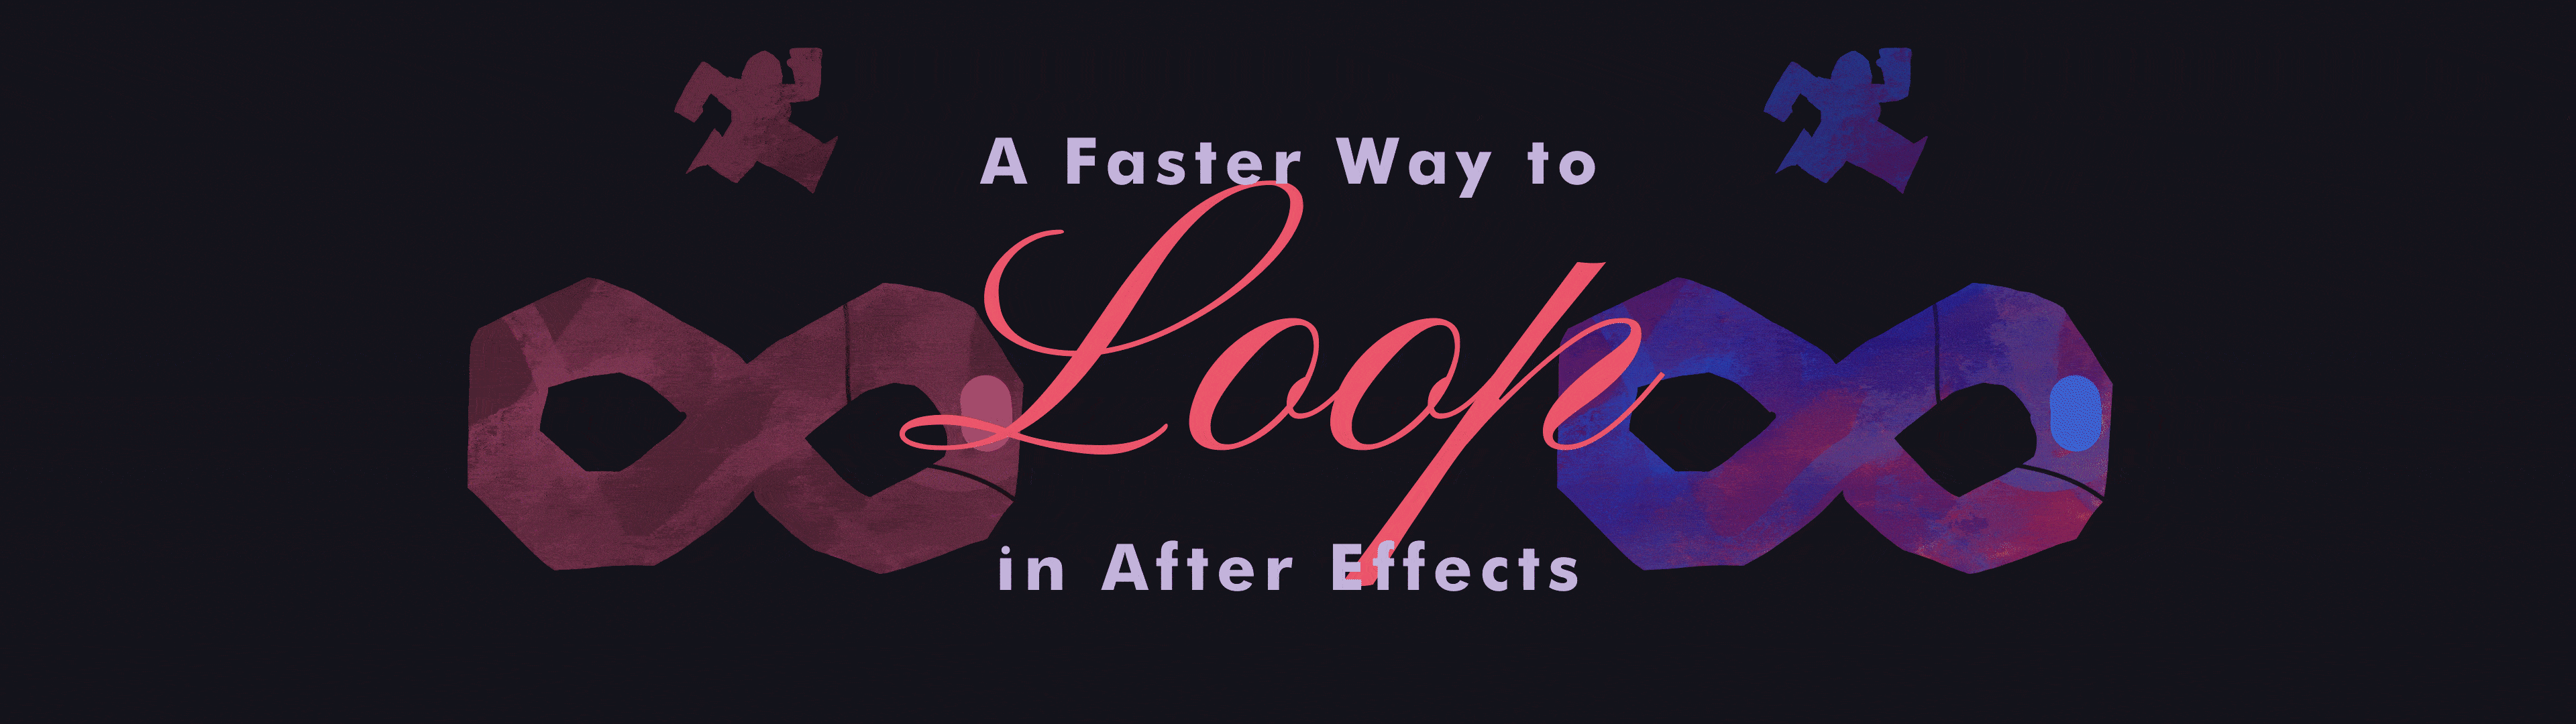 A Better Way to Loop in After Effects | by Goscha Graf ✨ brings motion to  your business | The Inspired Animator | Medium